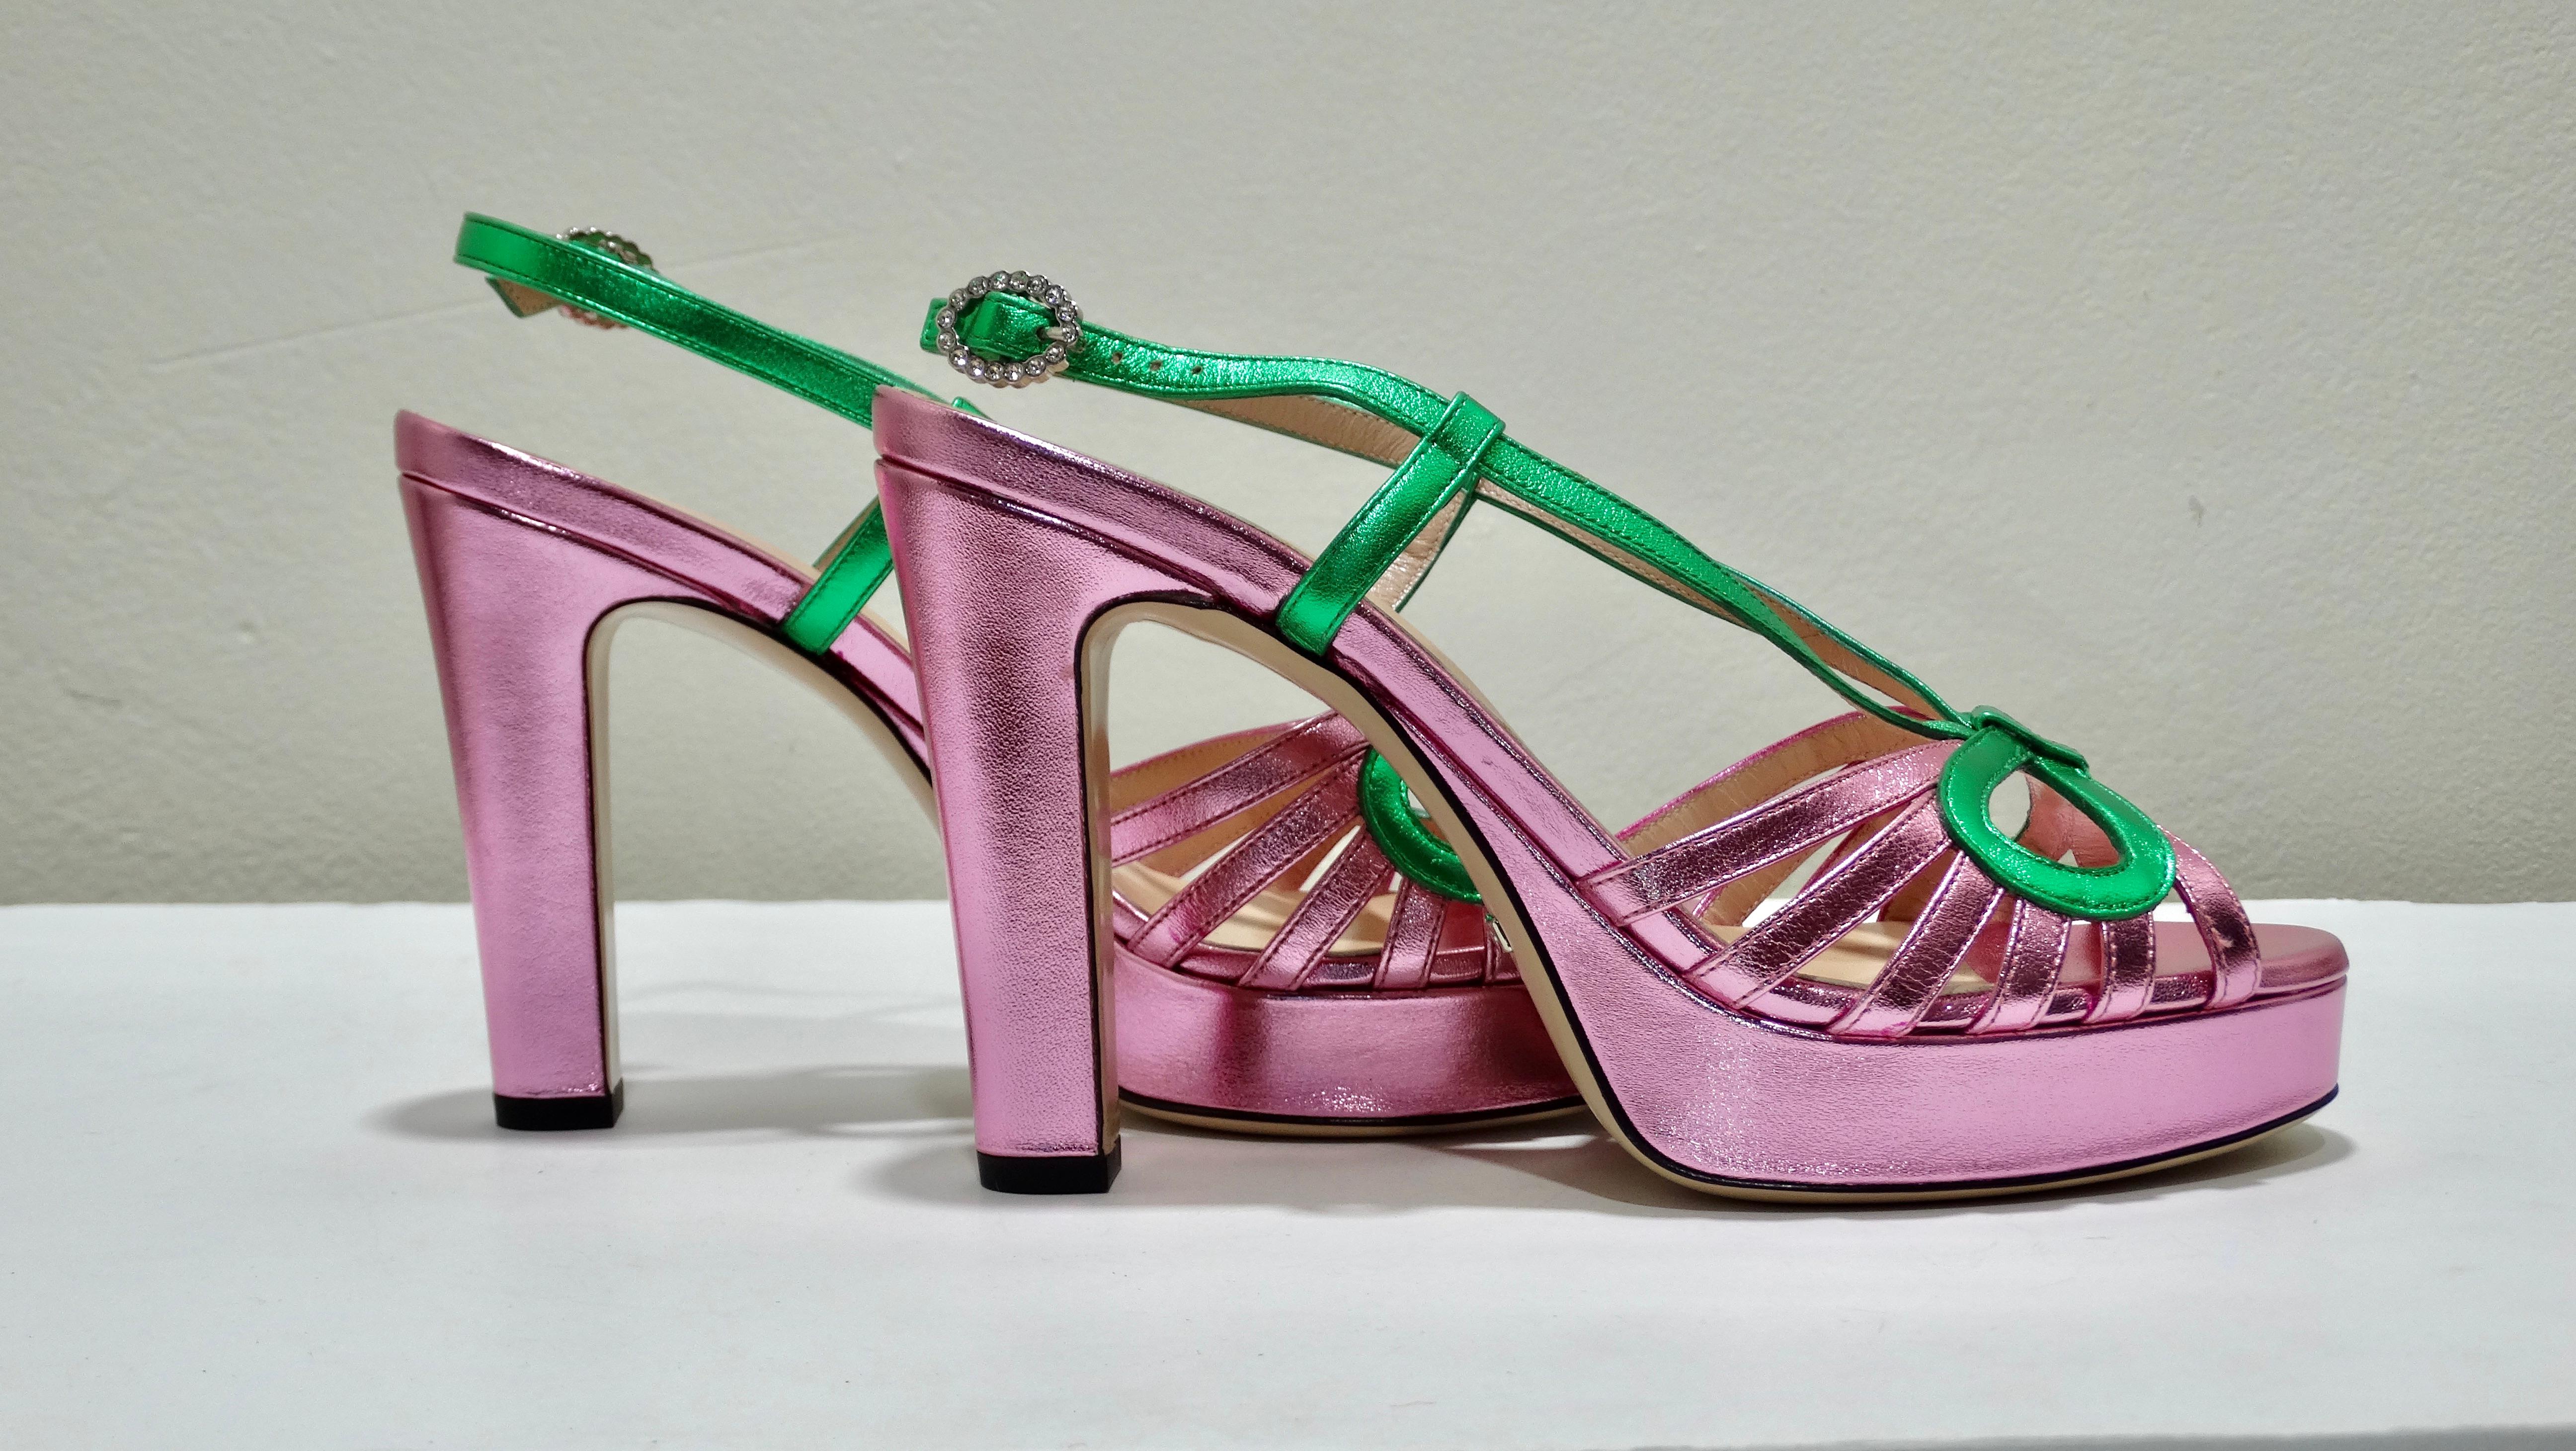 Brown 2018 Gucci Pink Green Metallic Leather Crossed Bow Sandals Platforms